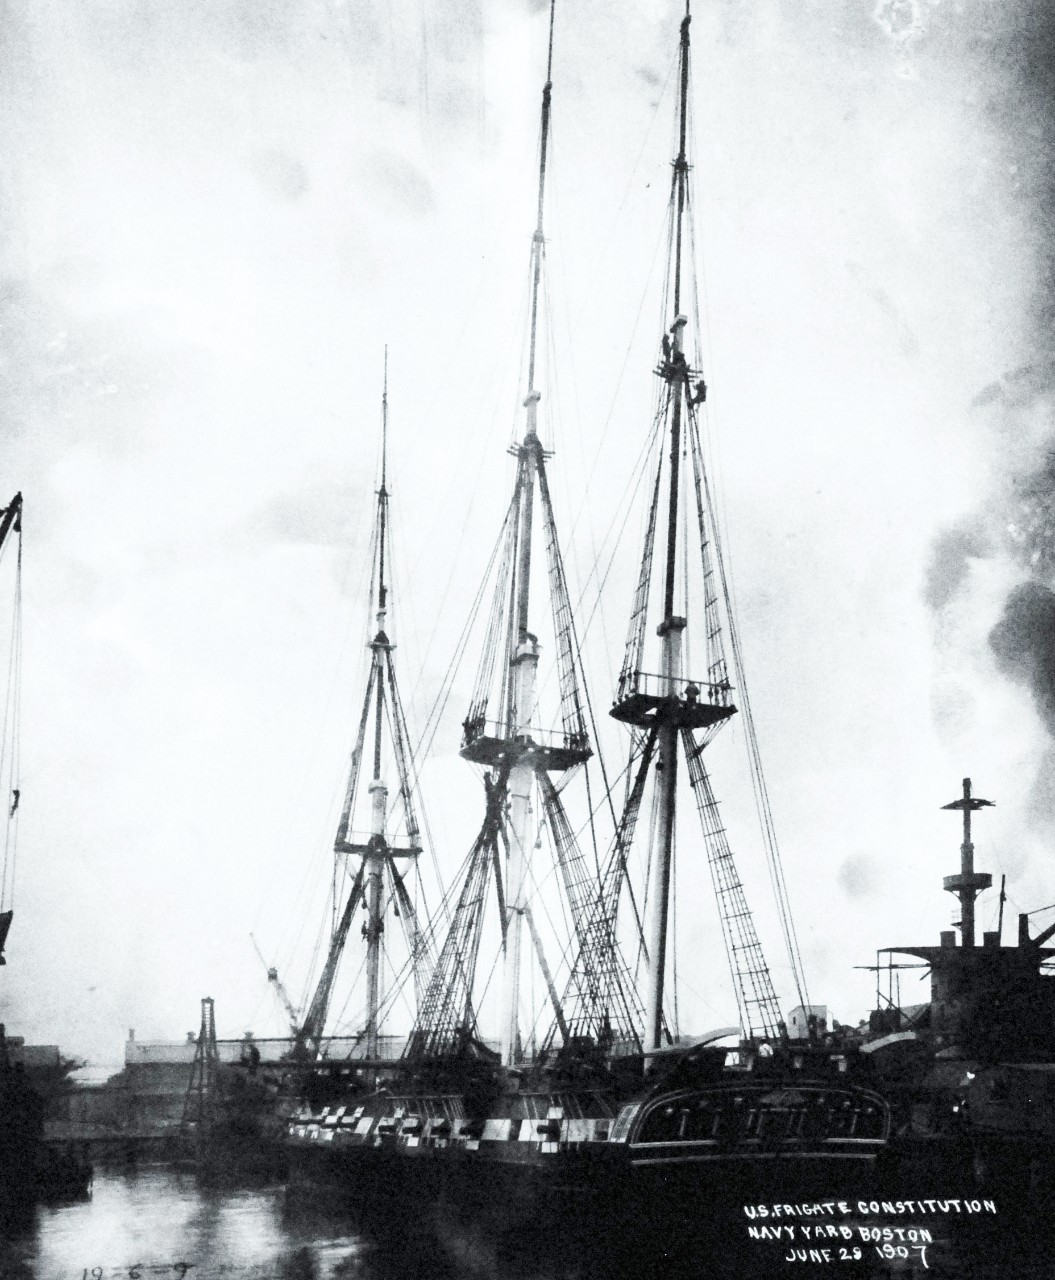 19-N-13348:   USS Constitution, 1907.   Constitution at the Boston Navy Yard, 29 June 1907.   Official Bureau of Ships Photograph, now in the collections of the National Archvies.    (2014/7/9).